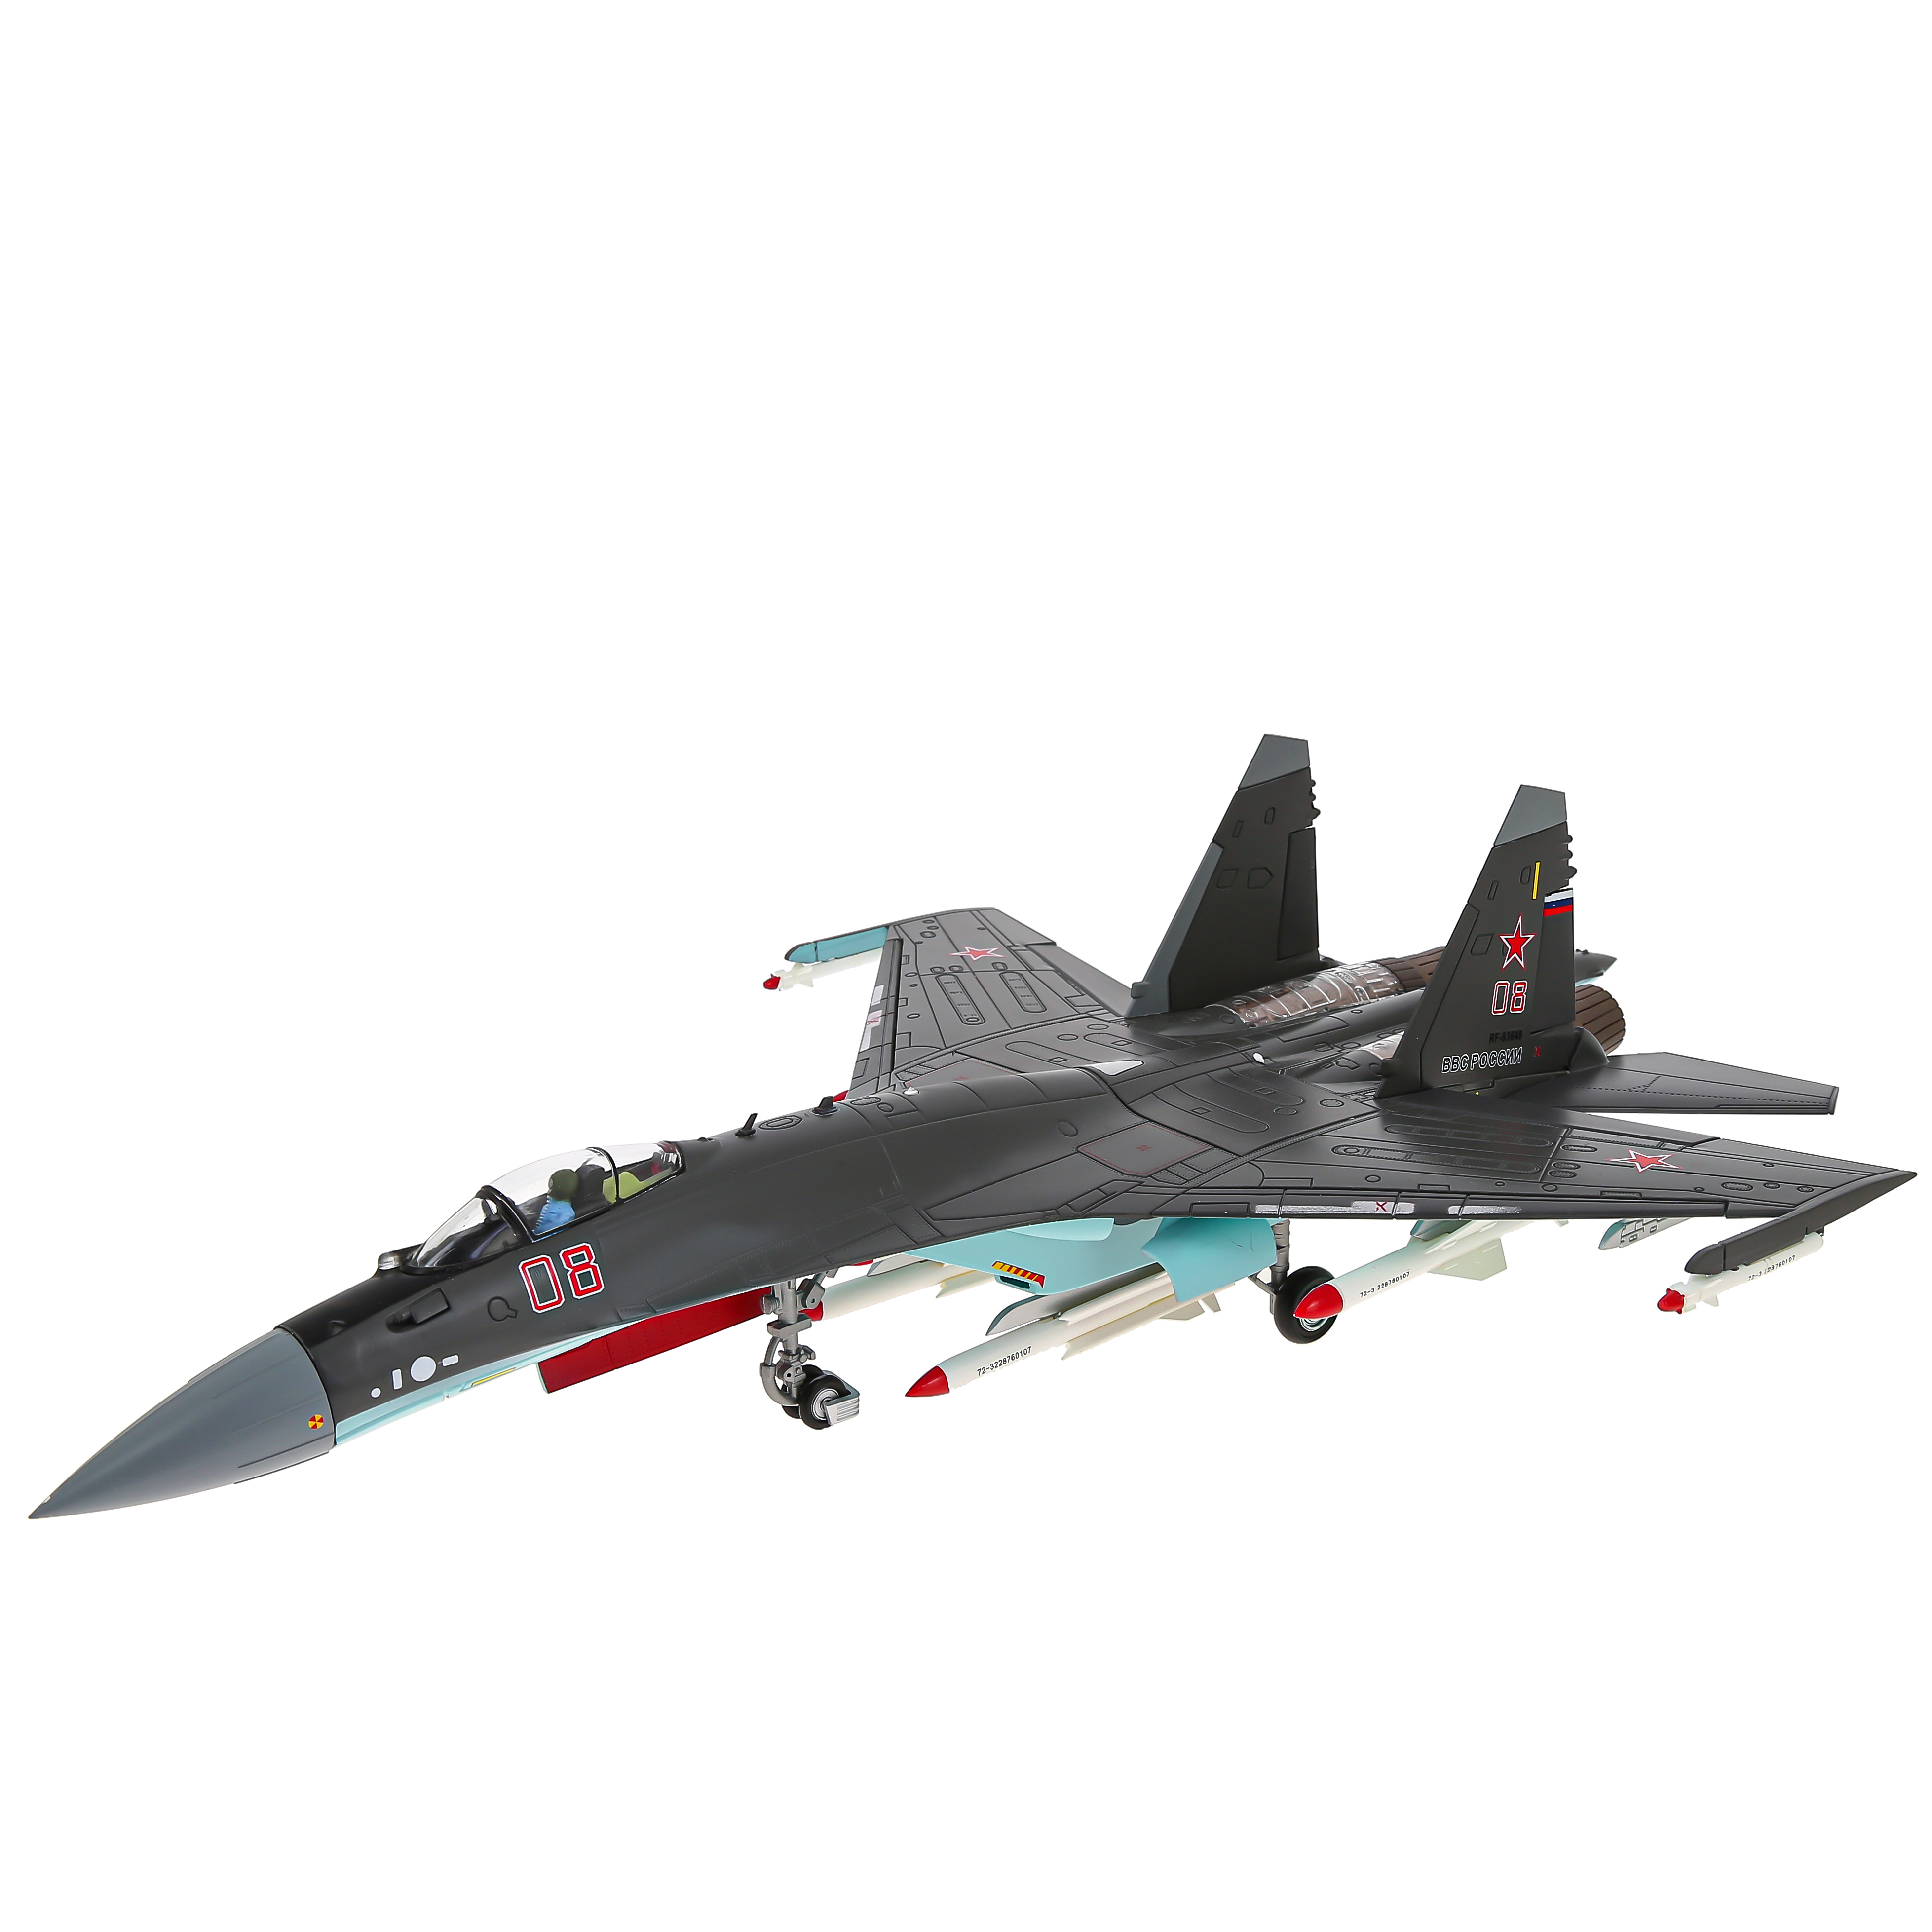       -35 ,  1:48.  47 . Large metal model of a Russian Su-35 fighter airplane, scale 1:48. Length 47 cm. # 3 hobbyplus.ru